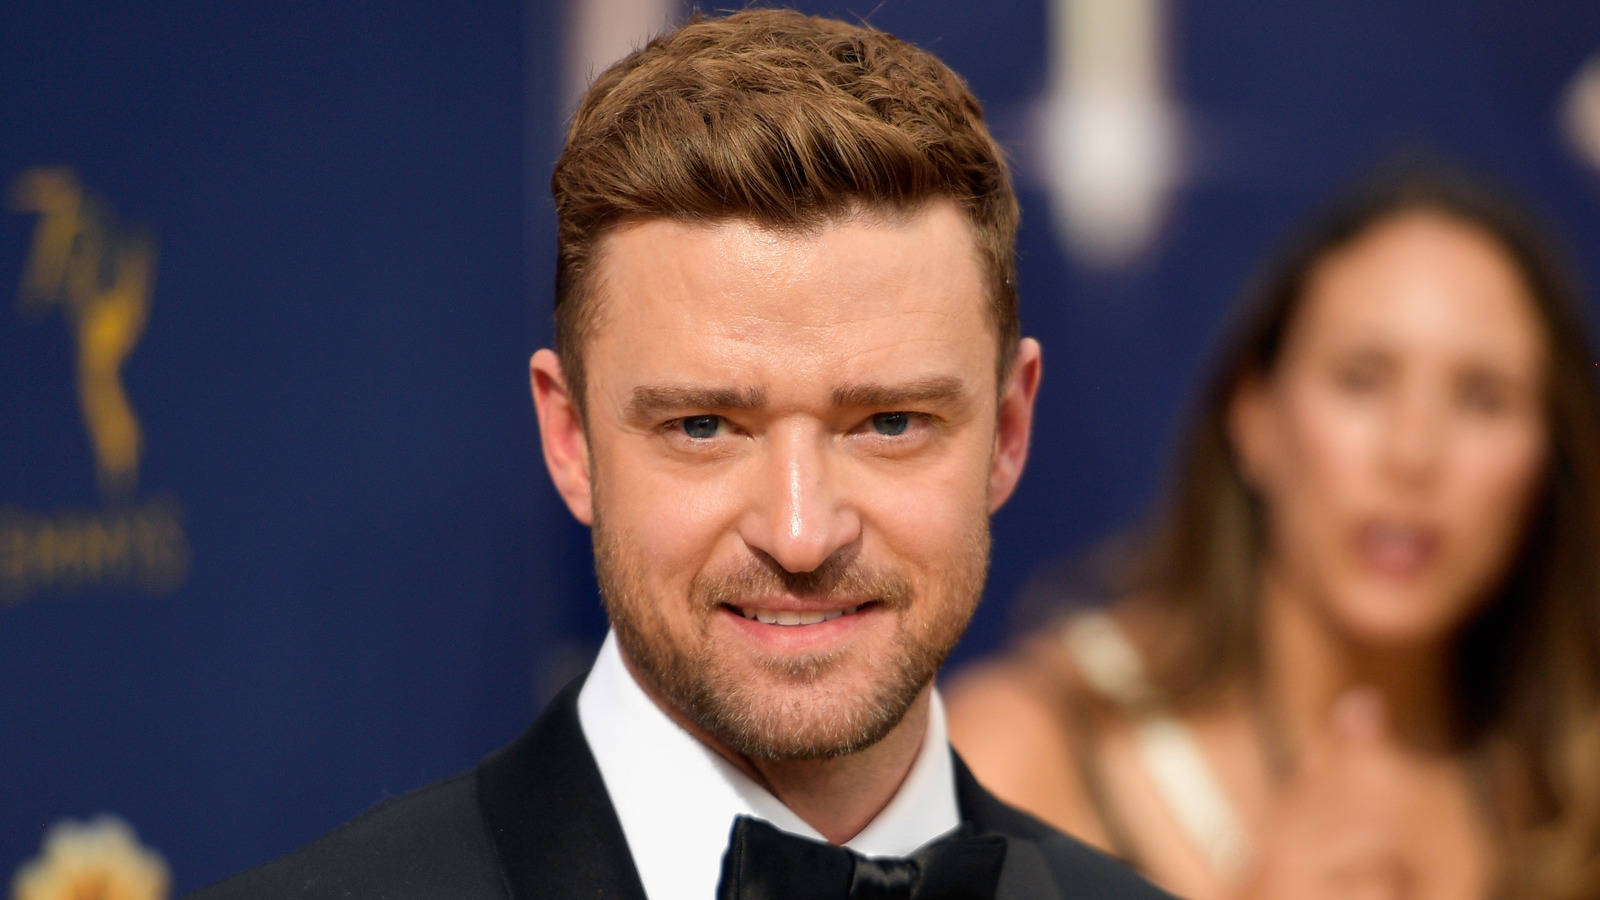 Justin Timberlake A Look At The Pop Star S Incredible Transformation News Colony